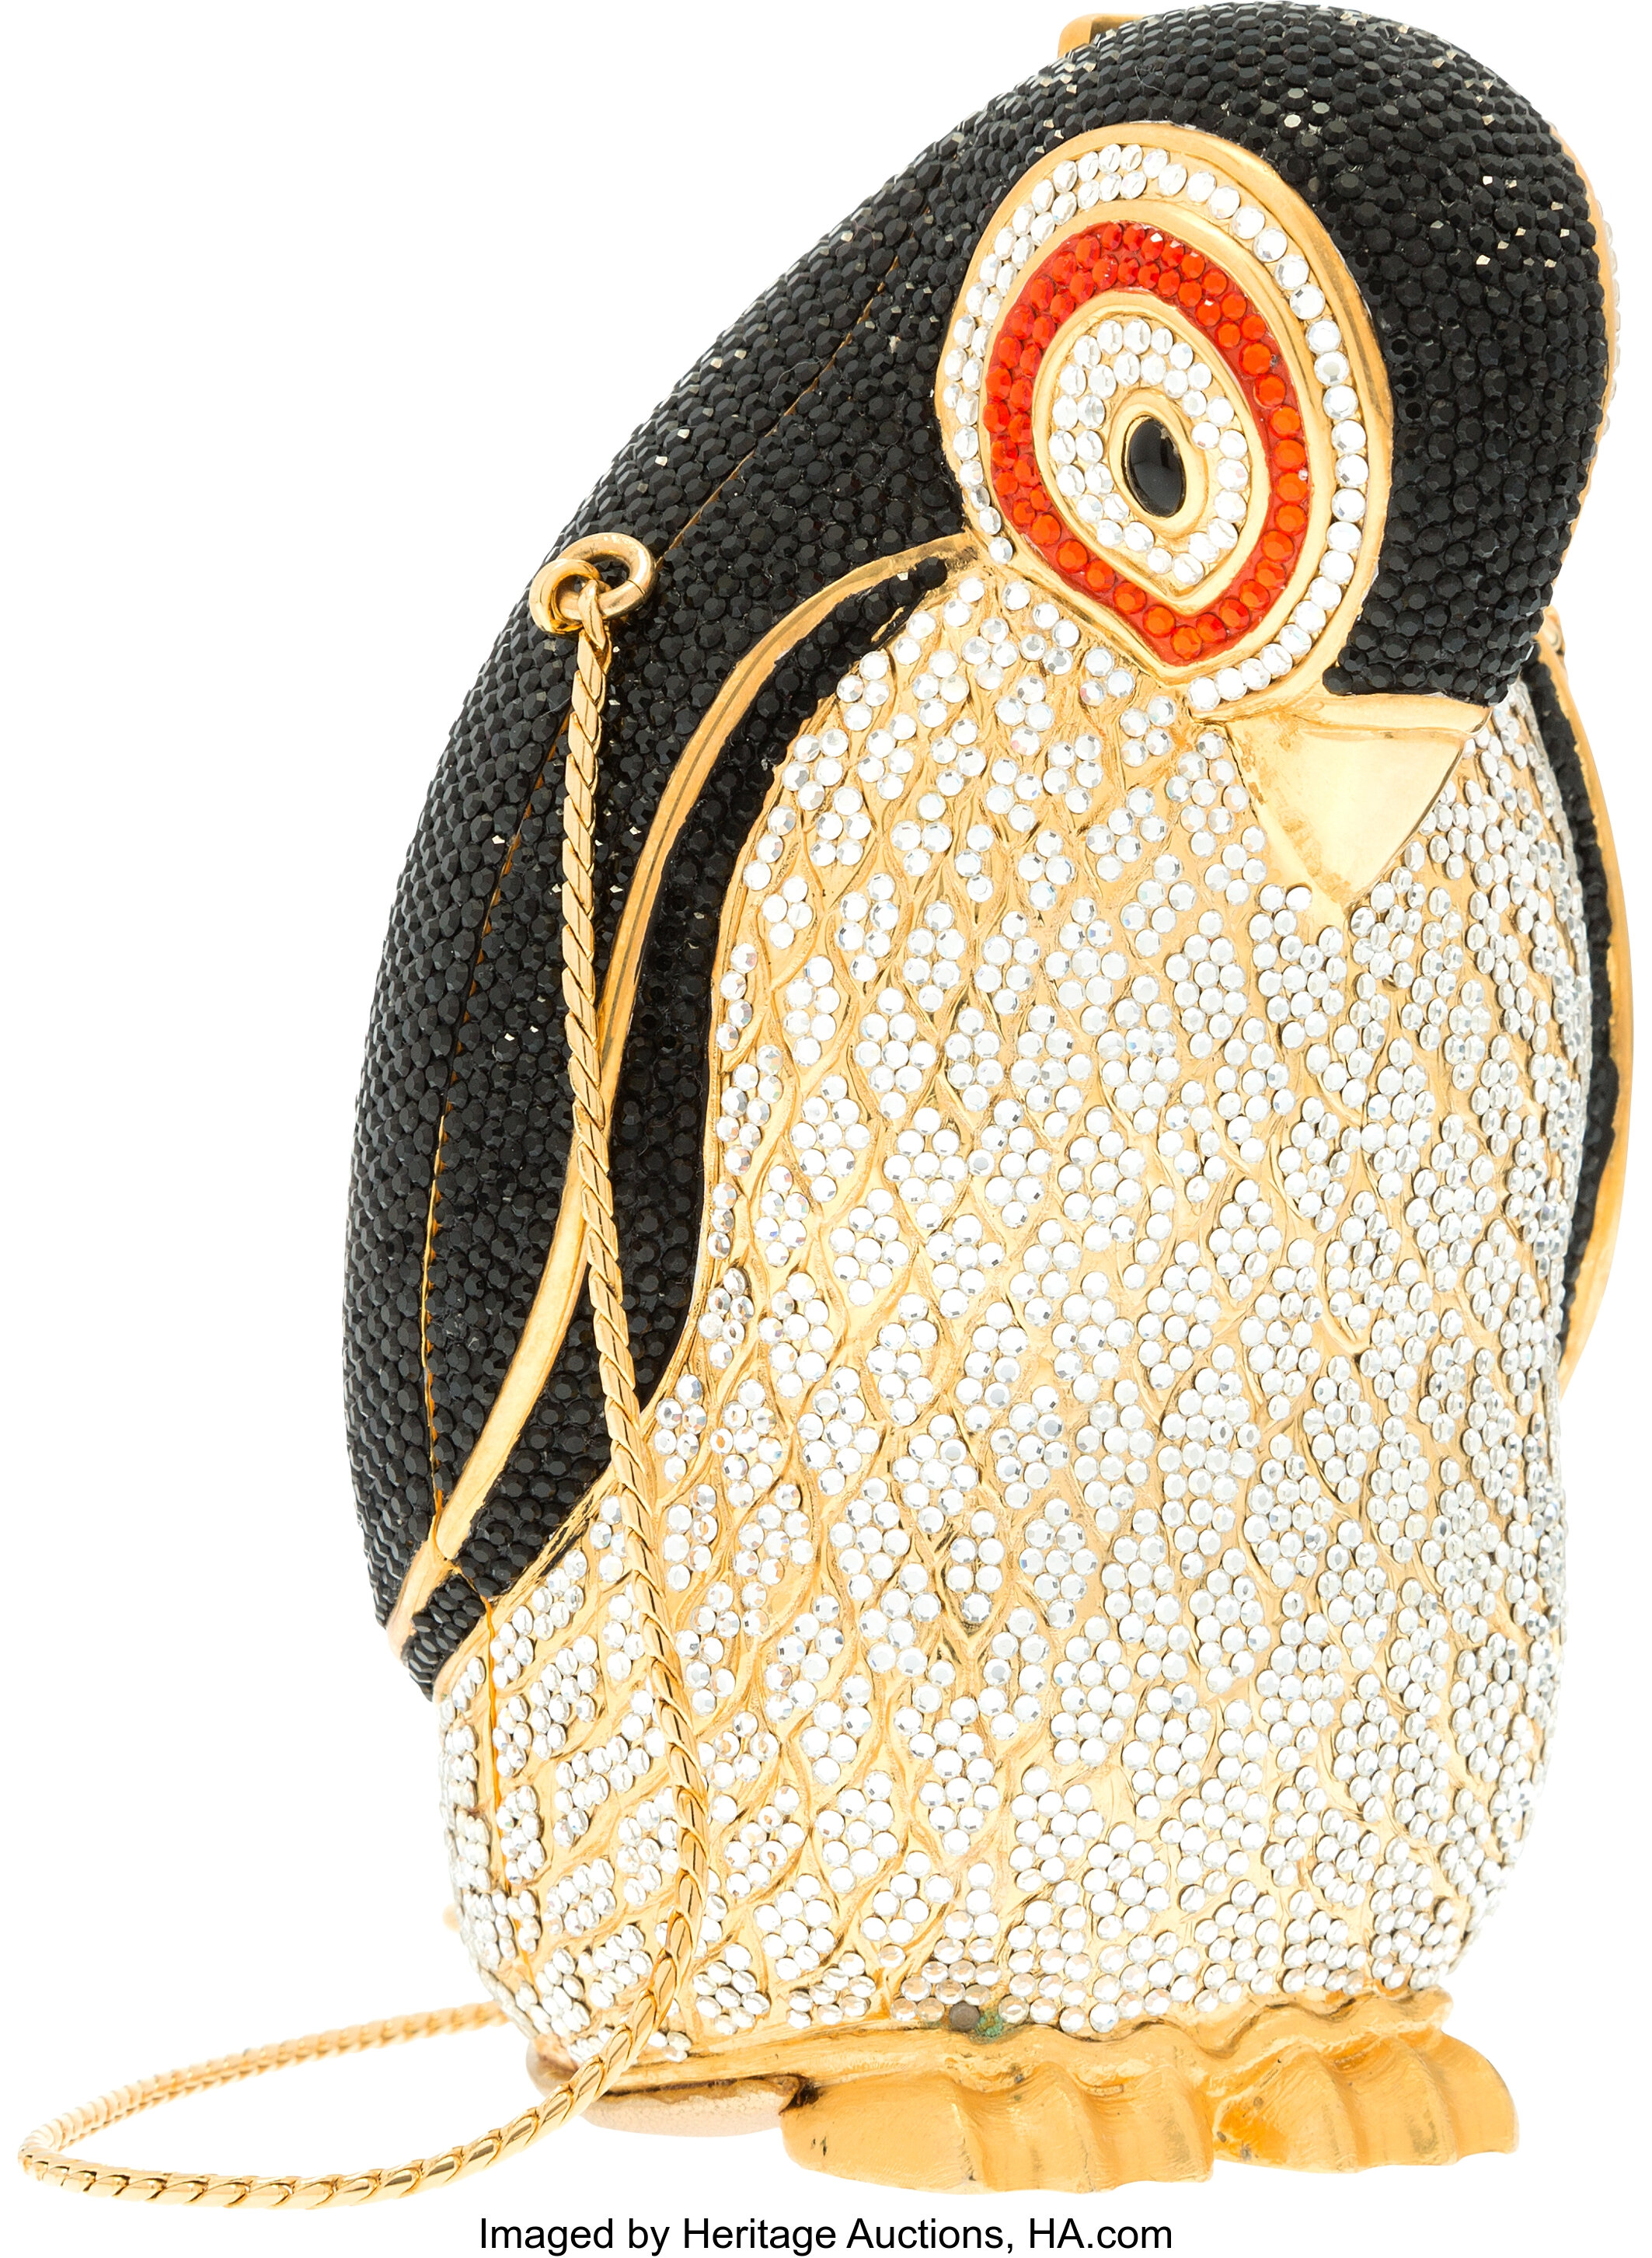 Heritage Auctions' Latest Event Includes Judith Leiber Clutches